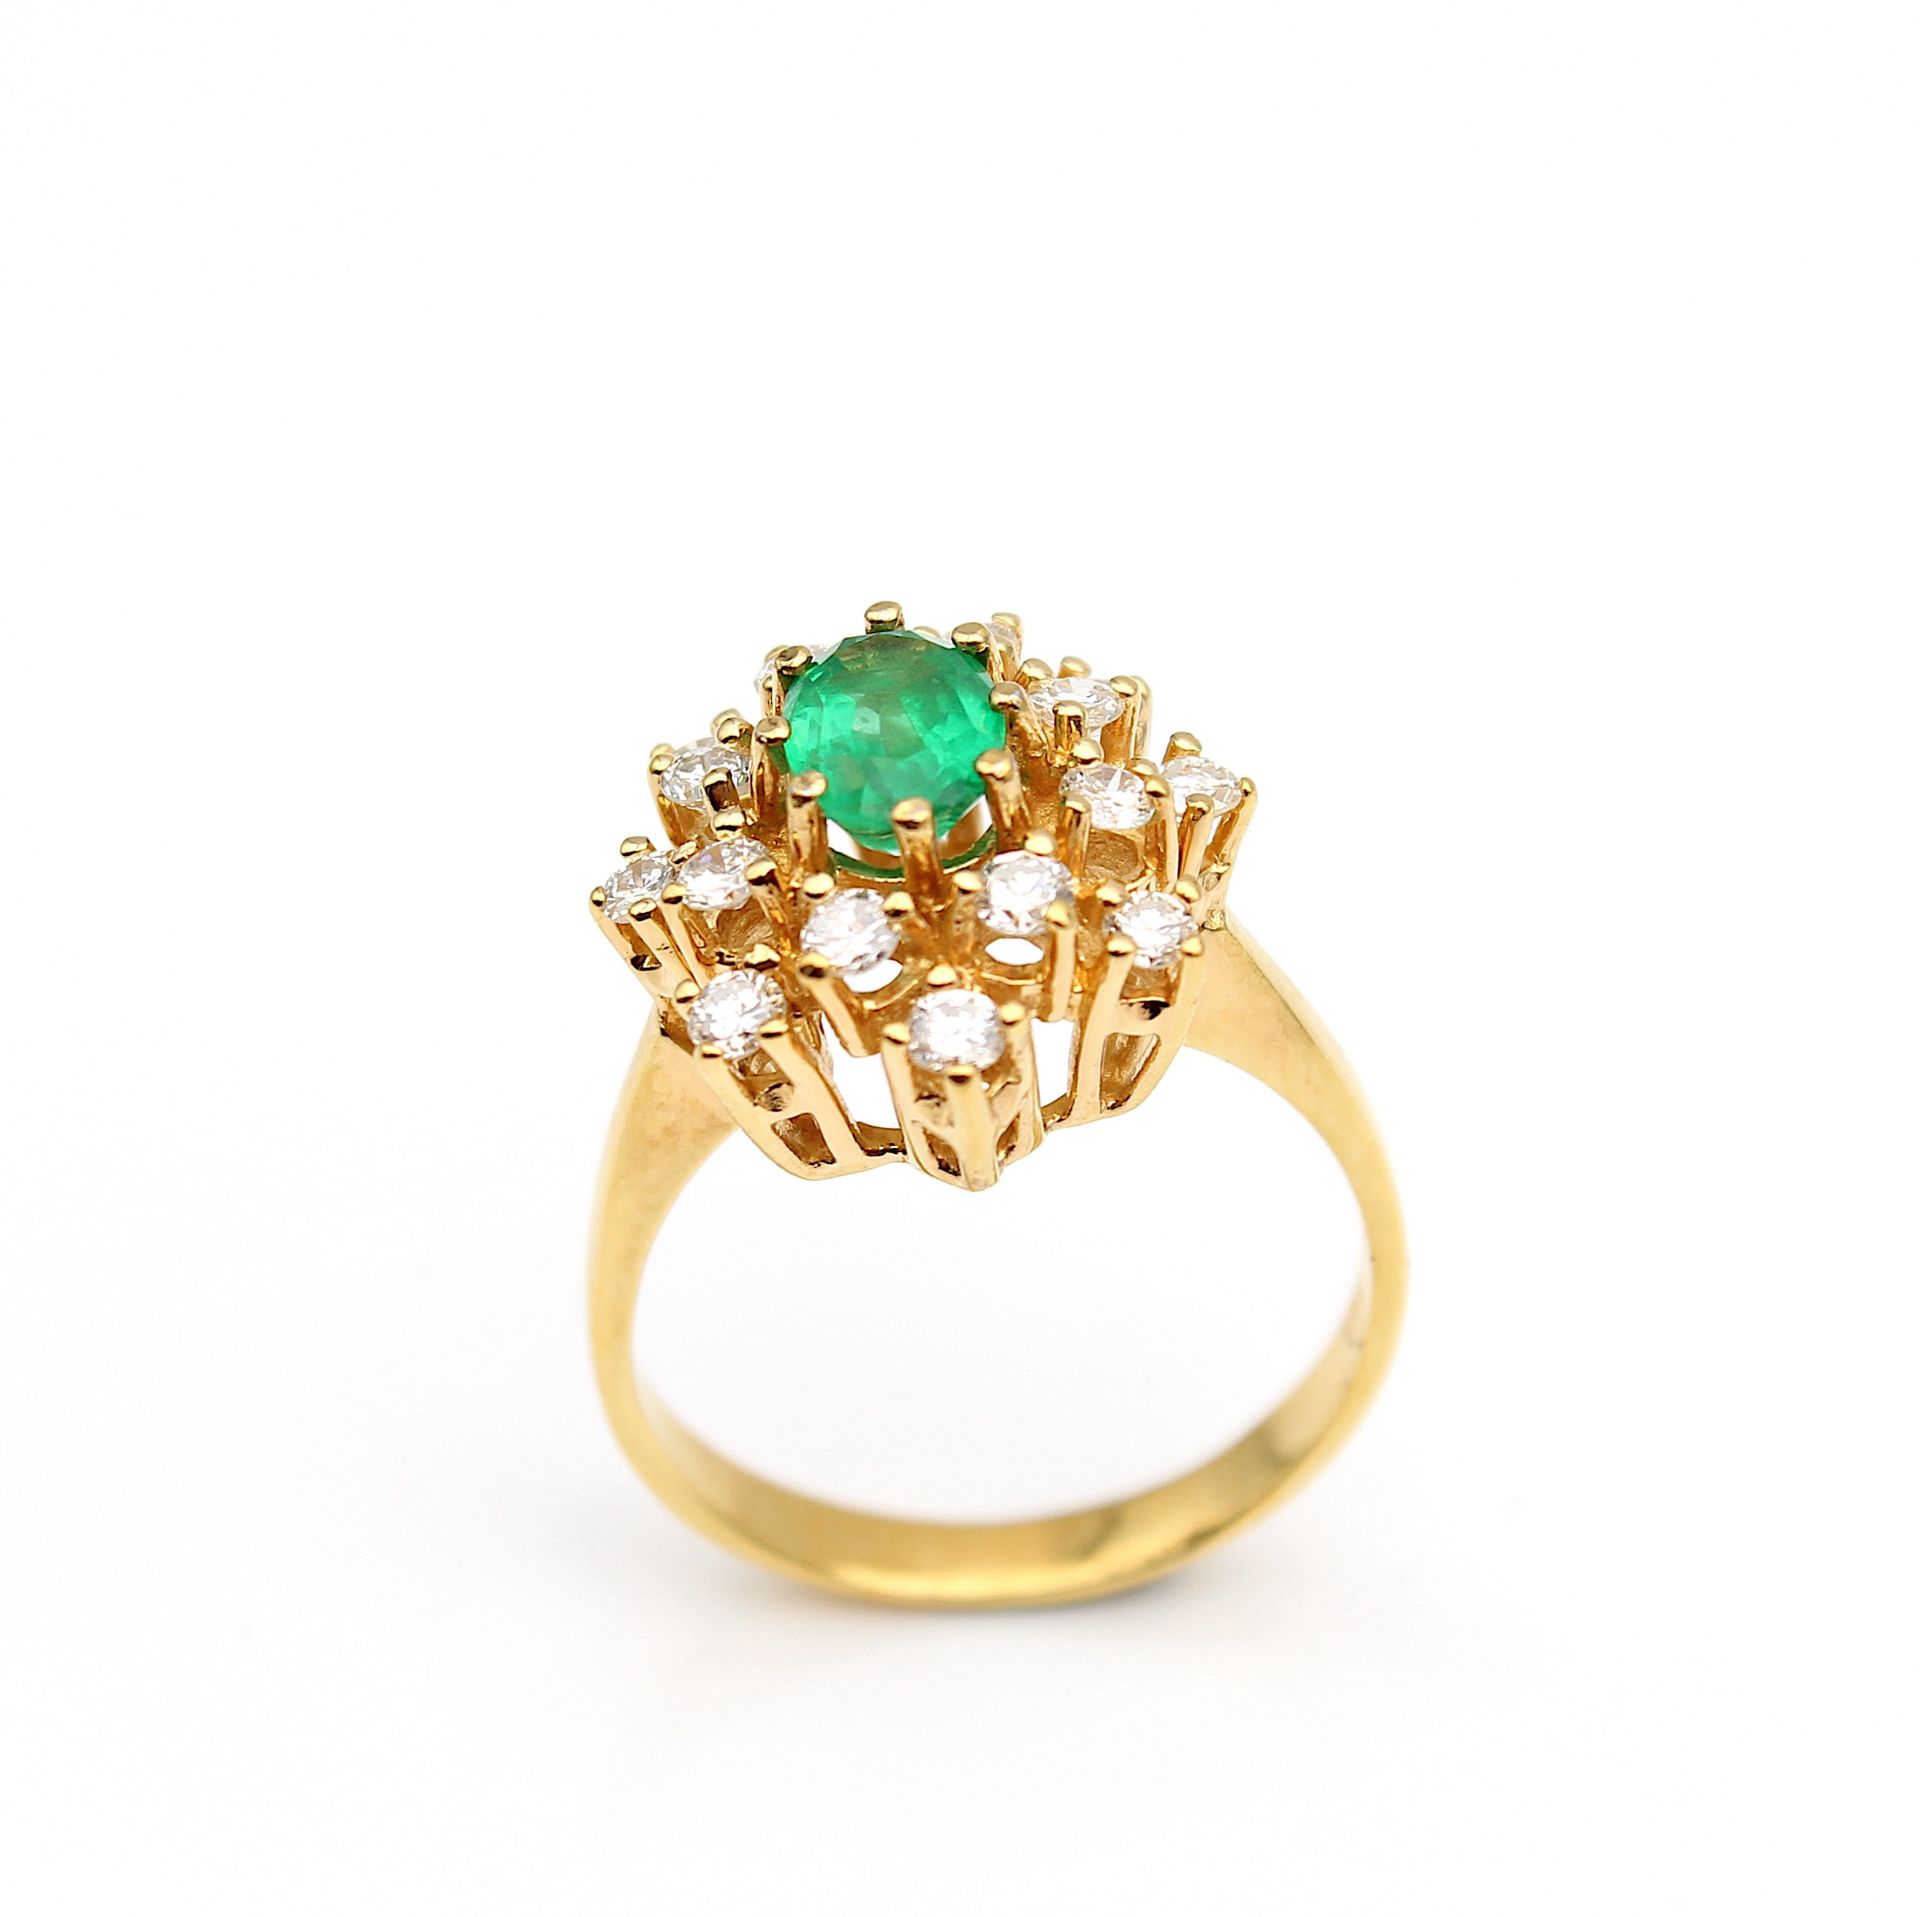 Jewel style ring with emerald and brilliant diamonds